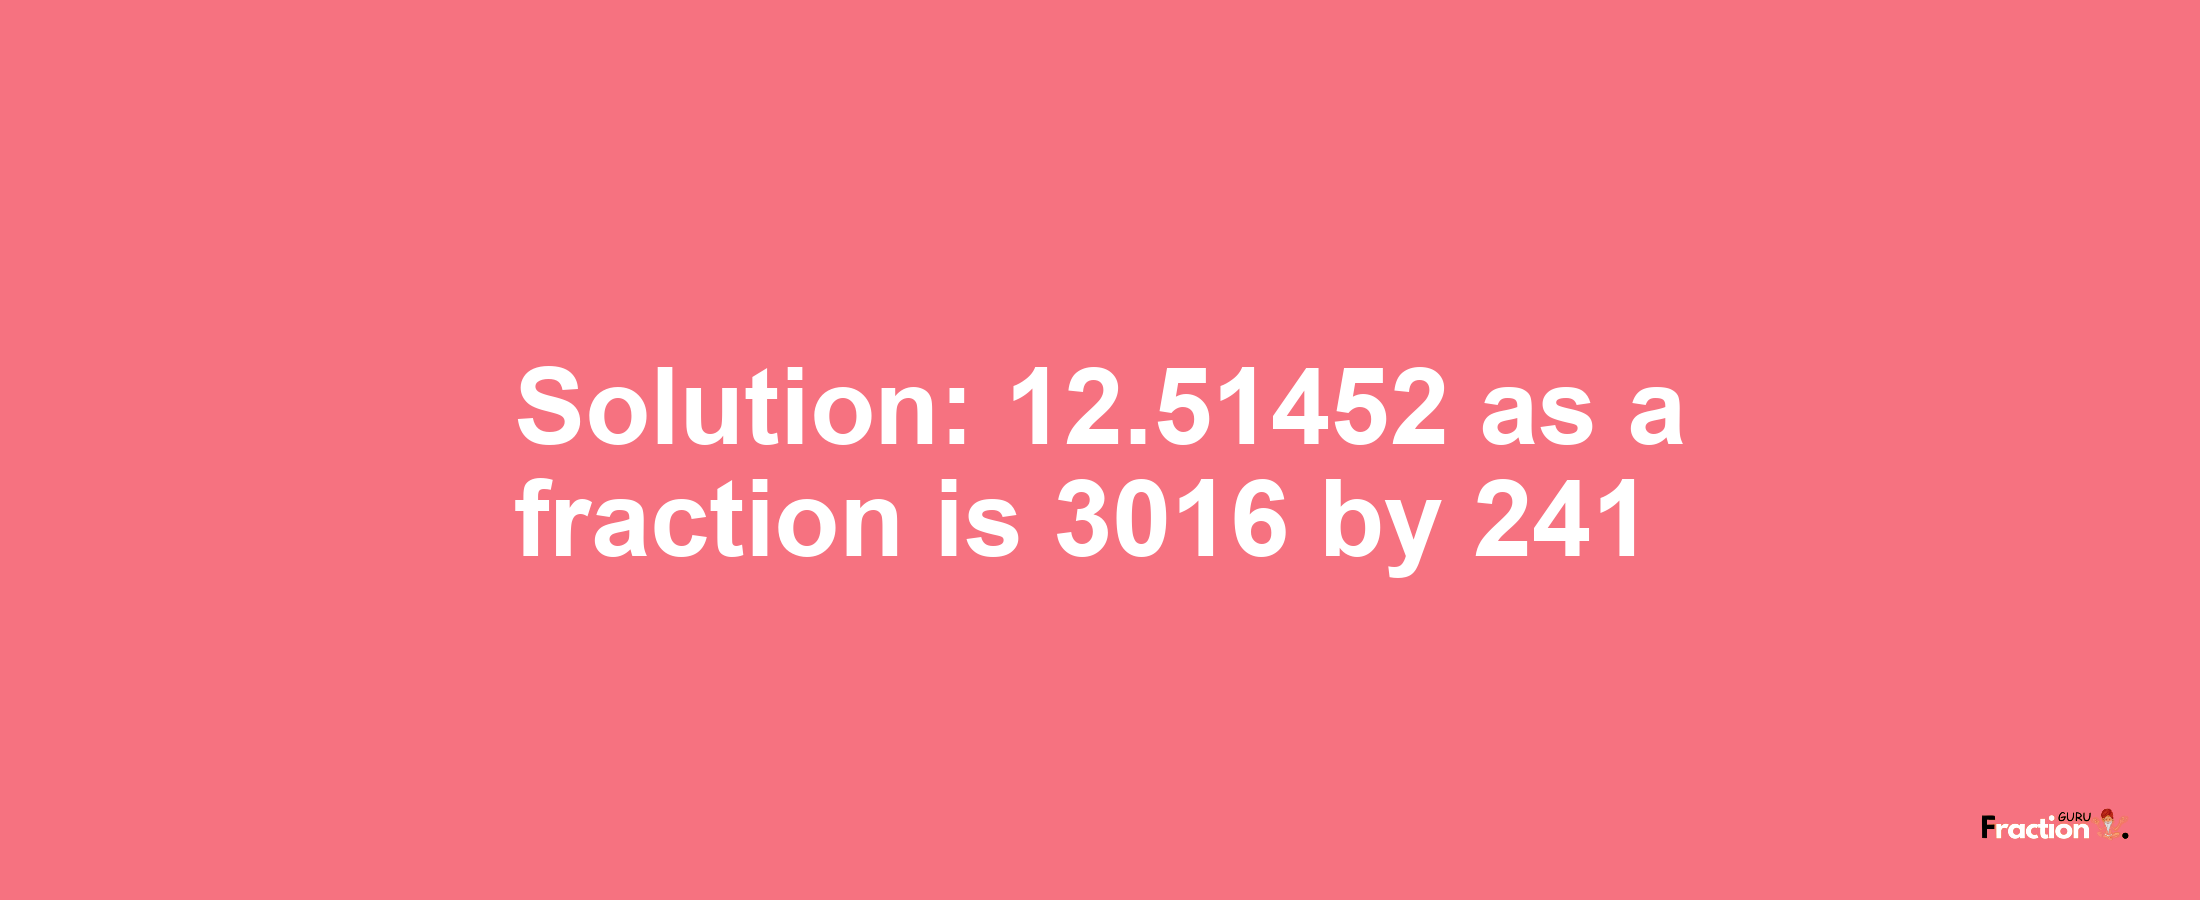 Solution:12.51452 as a fraction is 3016/241